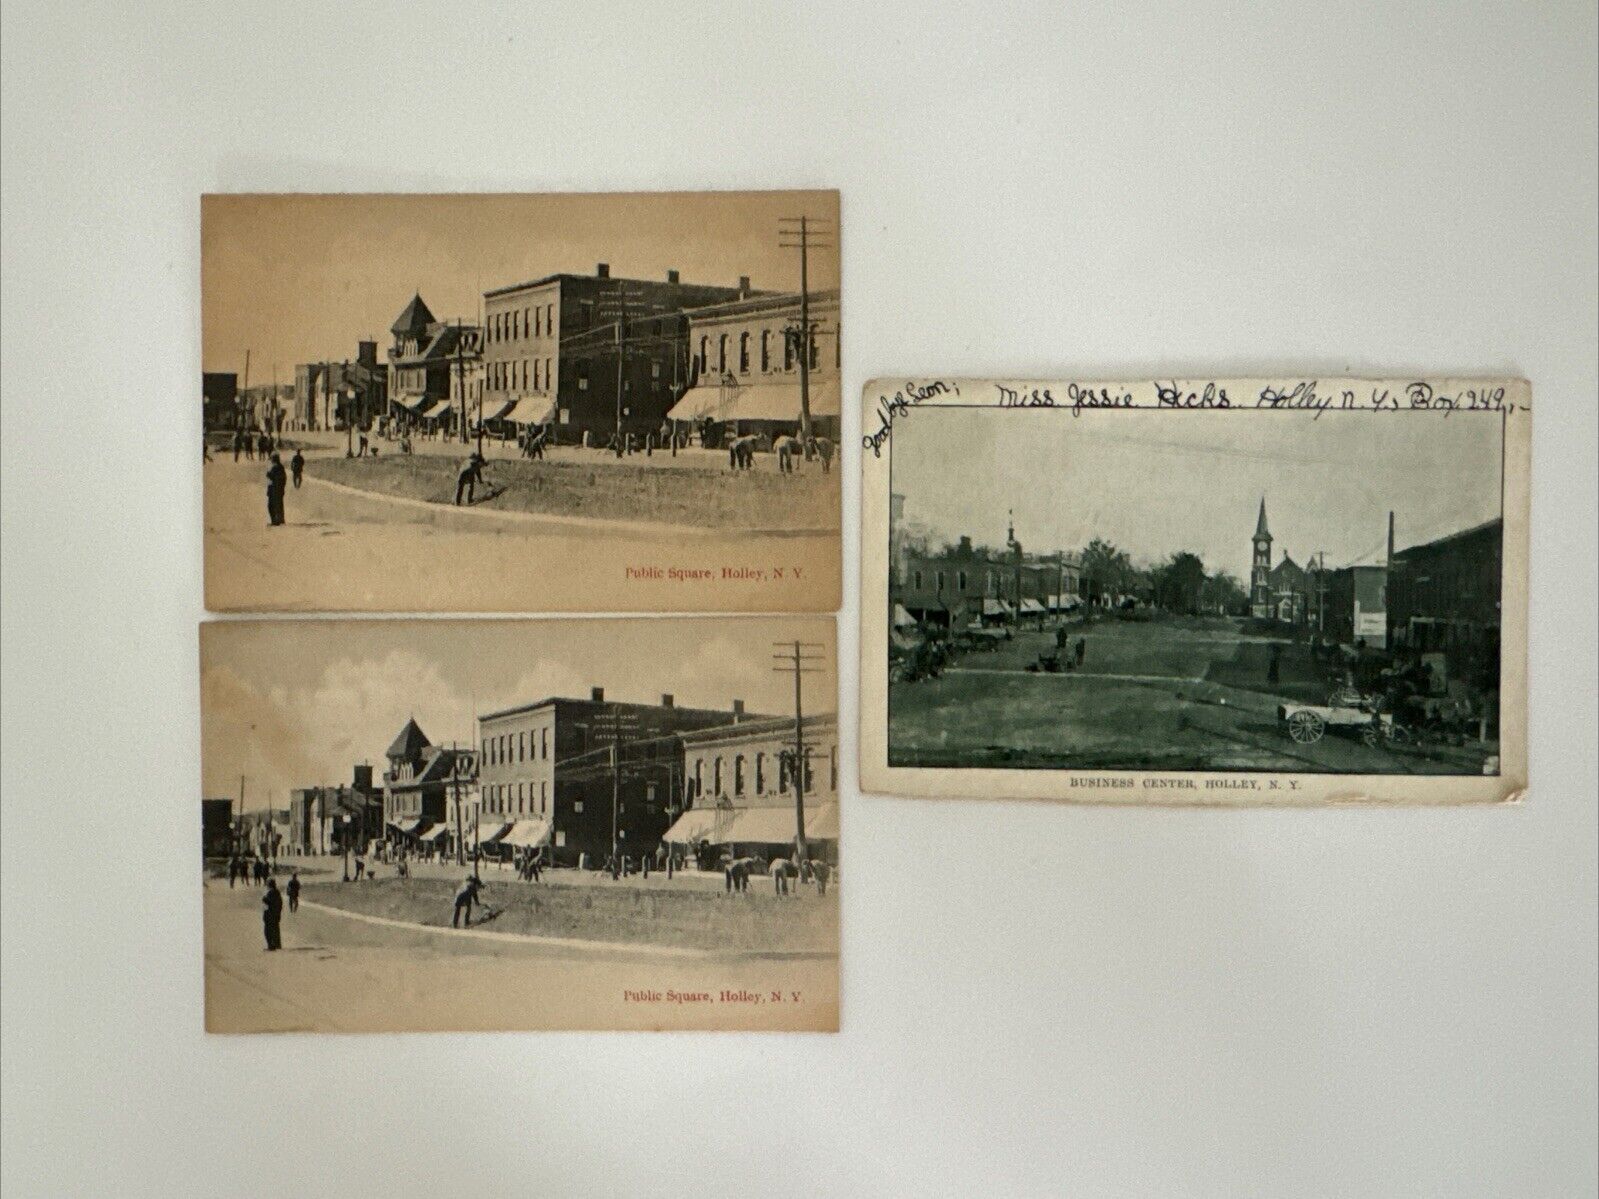 RPPC Holley, NY - Public Square & Business Center Real Photo Postcards Lot